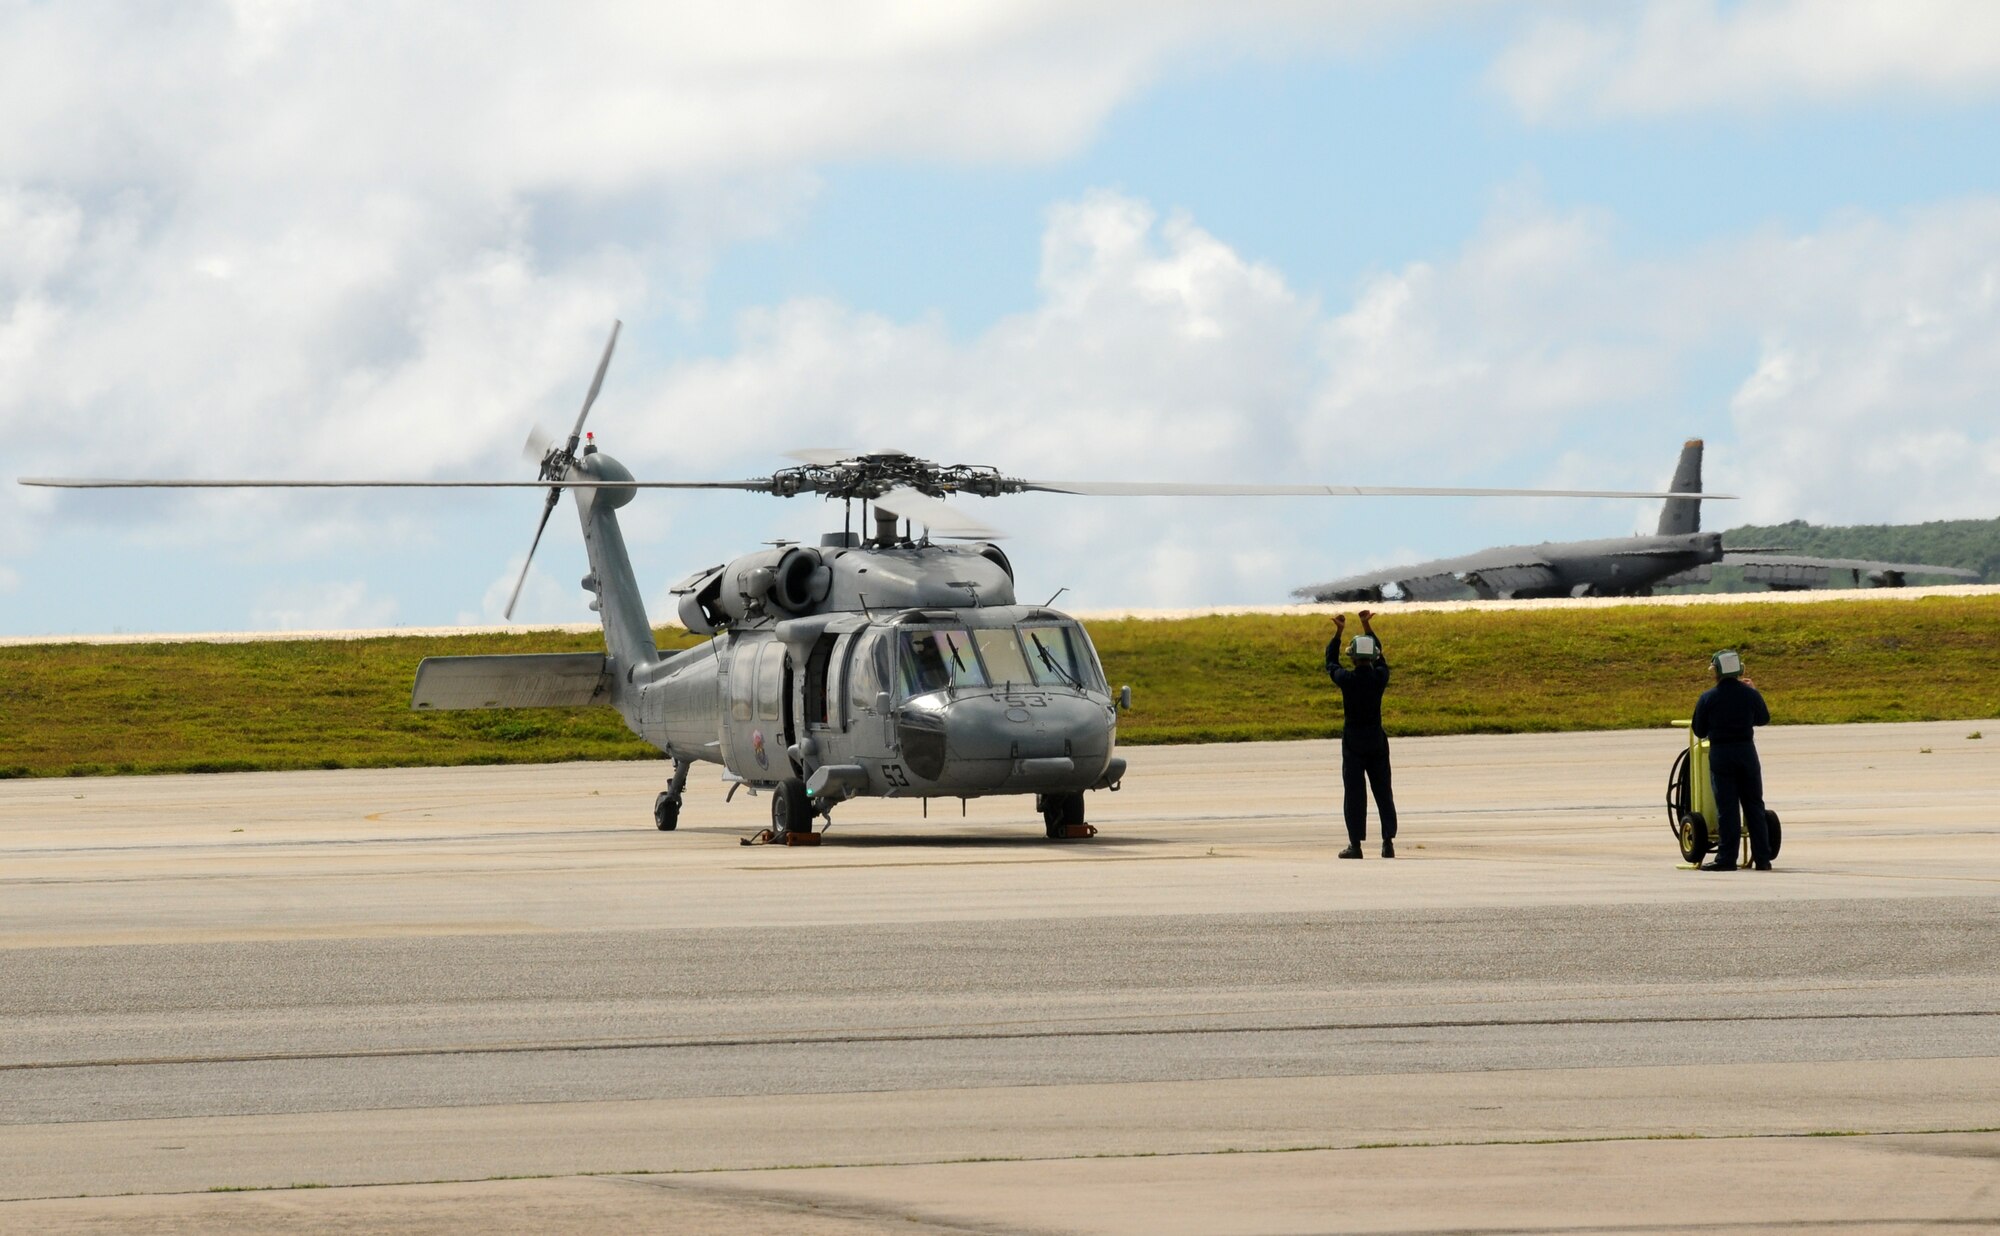 ANDERSEN AIR FORCE BASE, Guam - A MH-60S Knighthawk helicopter lands on the flightline here Oct. 29 returning Helicopter Sea Combat Twenty-Five Detachment 1 Sailors from a nine-month deployment.  During the deployment to the Western Pacific, Det. 1 safely flew over 530 flight hours and transported 5,500 tons of ordnance.  (U.S. Air Force photo by Staff Sgt. Jamie Lessard)